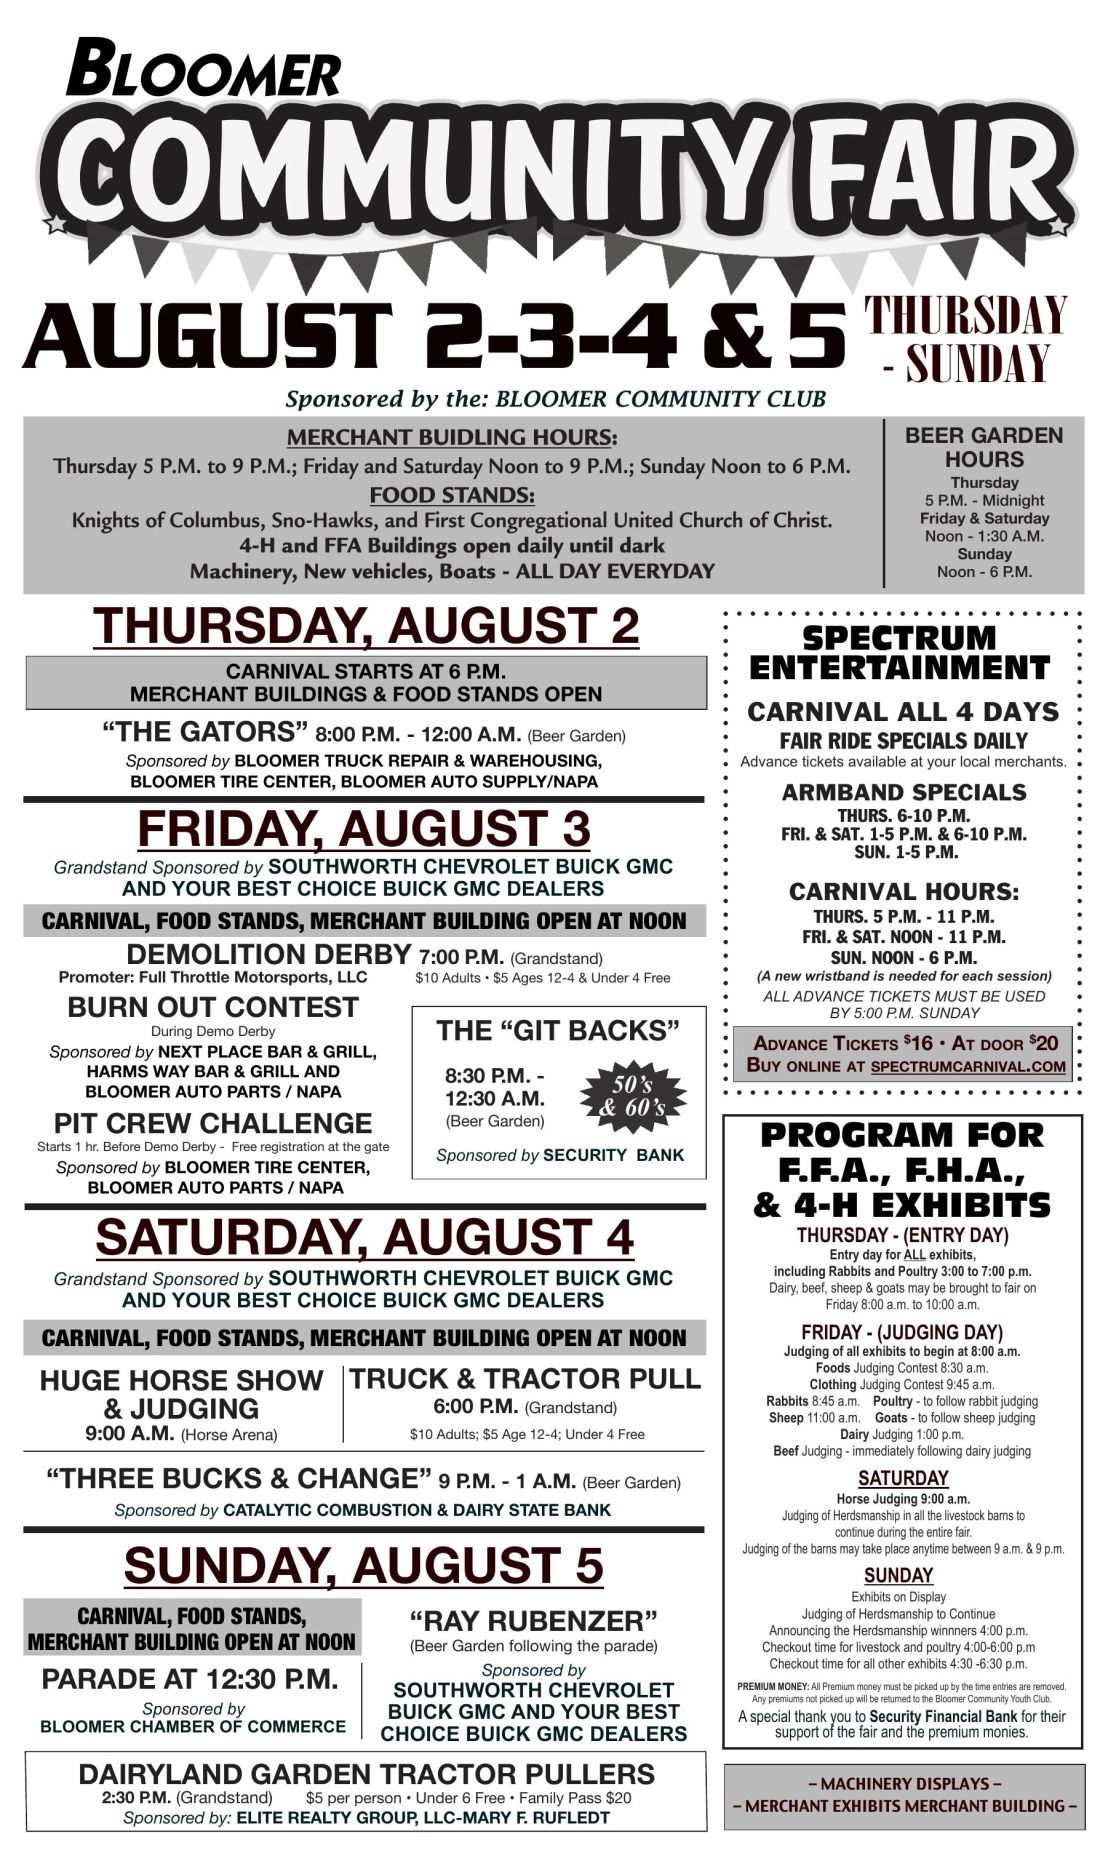 Bloomer Community Fair Events Schedule Free News & Features